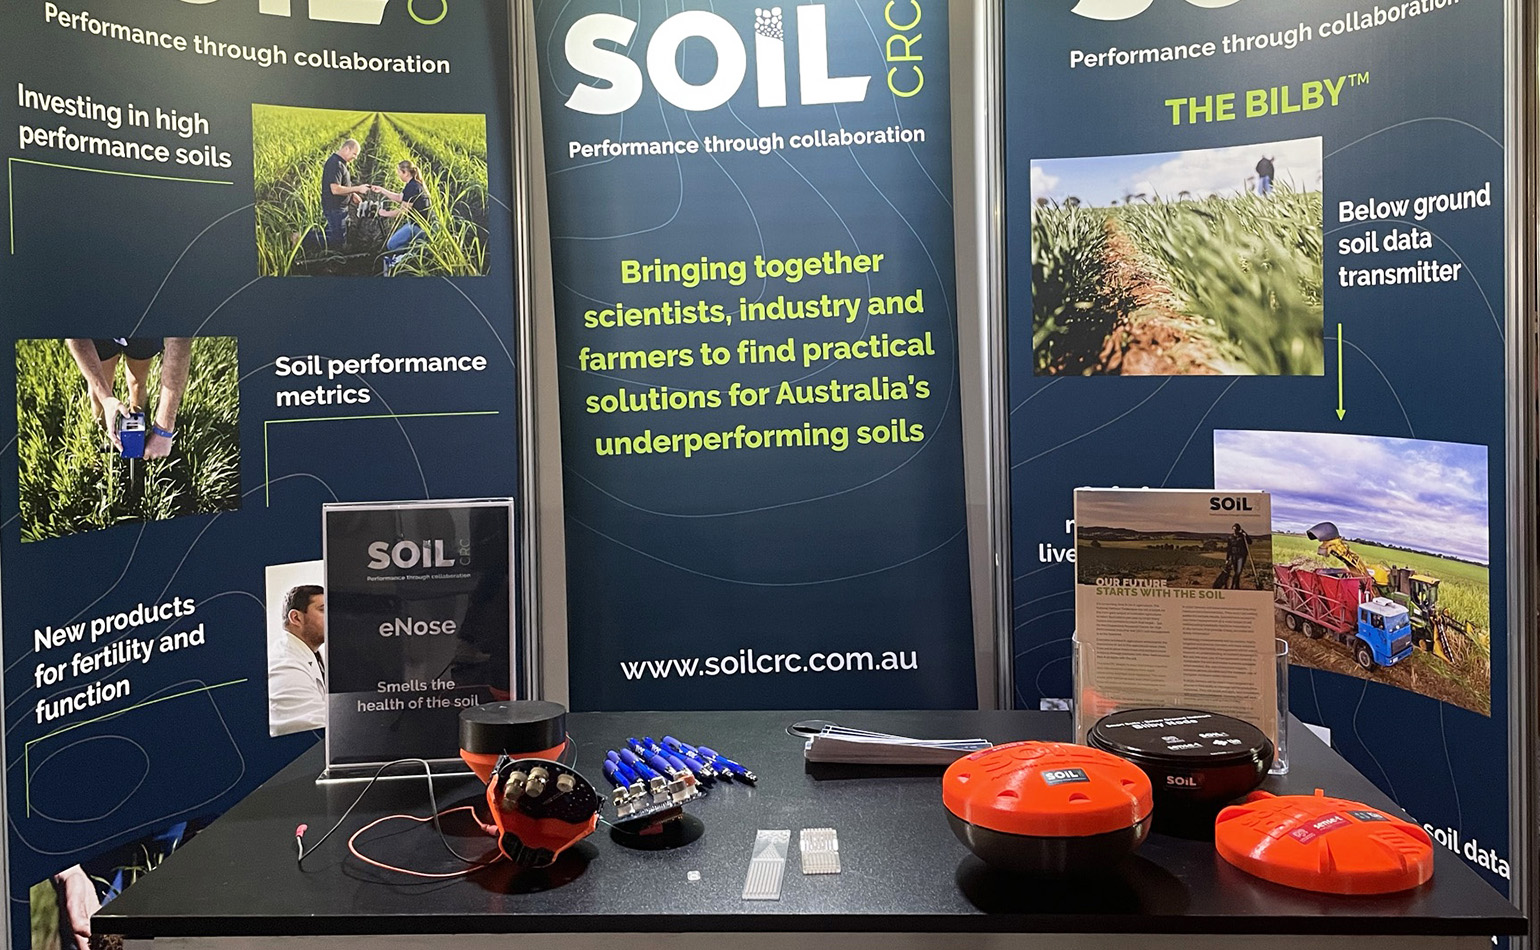 Emerging soil technology from the Soil CRC